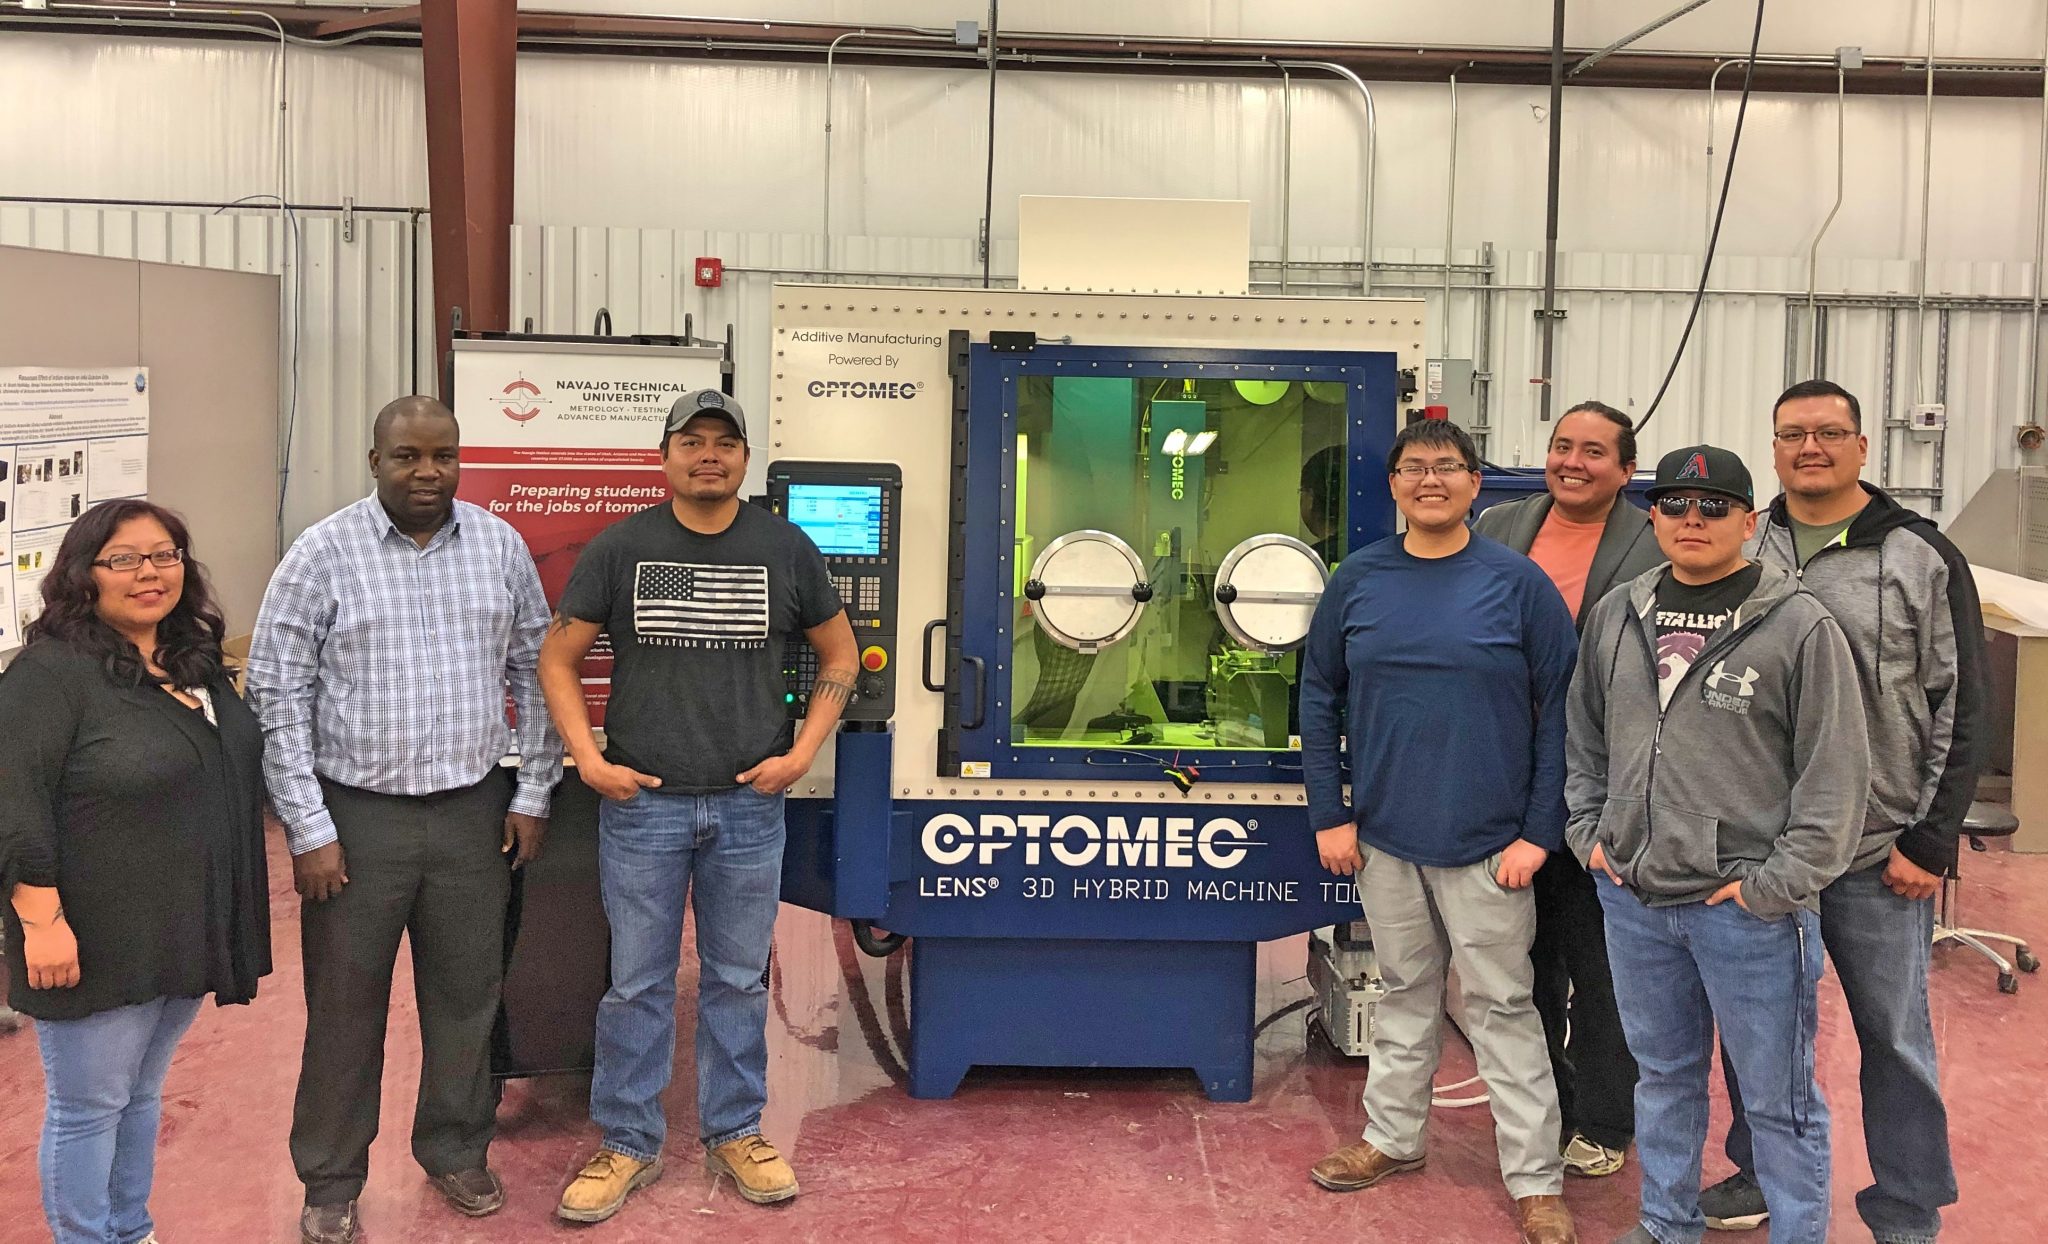 Dr. Monsuru Ramoni, Ph.D., assistant professor of Industrial Engineering at Navajo Technical University and his team of students will be investigating the benefits of Additive Manufacturing for space exploration with the help of Optomec LENS for NASA. Photo via Optomec.